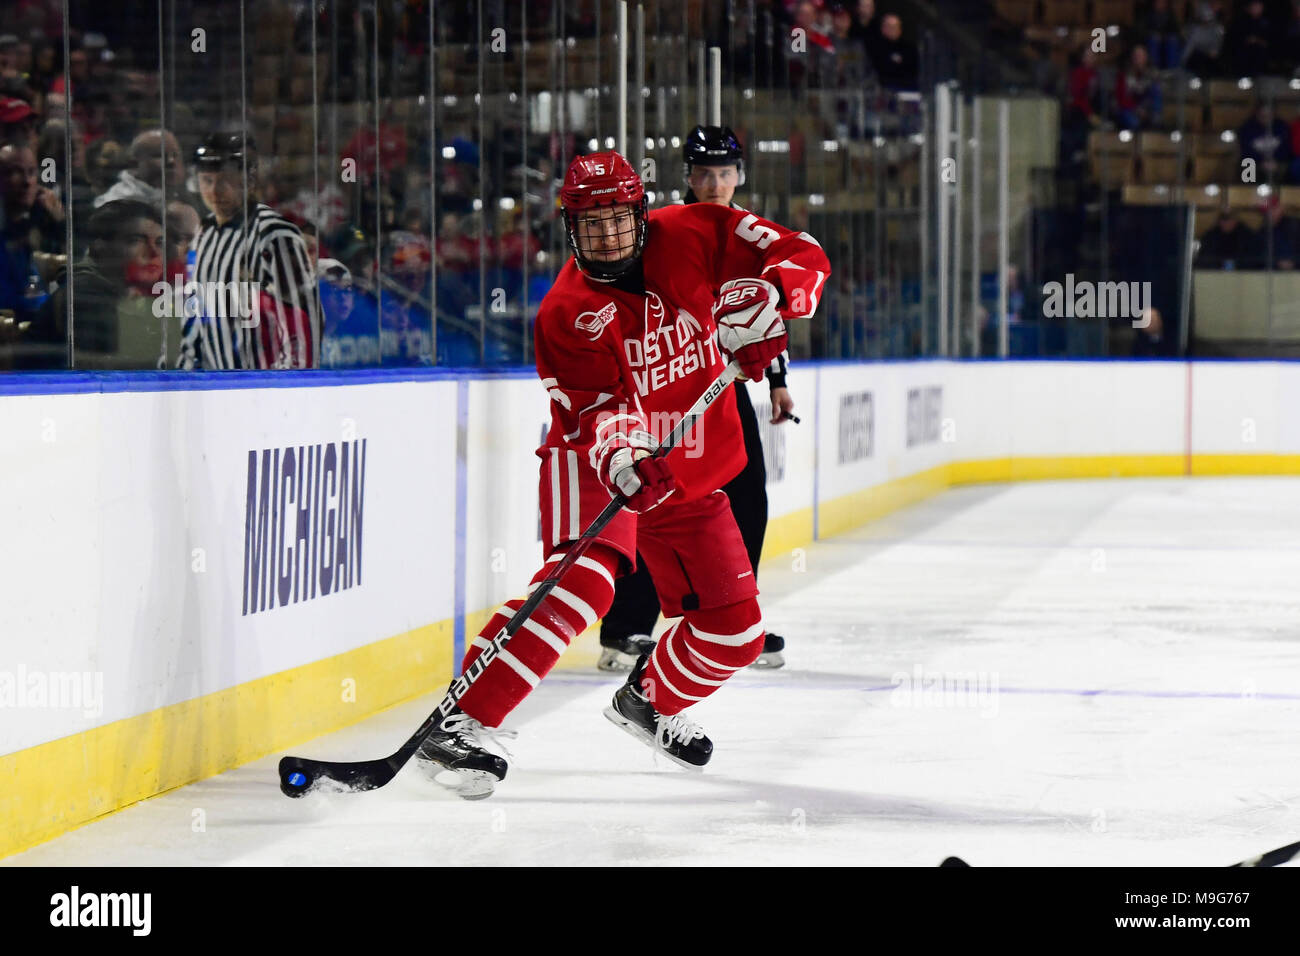 Worcester, Mass. 25th Mar, 2018. Boston University Terriers defenseman Cam Crotty (5) in game action during the NCAA Division I Northeast Regional Championship between Boston University and Michigan held at the DCU Center in Worcester, Mass. Michigan defeats Boston 6-3. Eric Canha/CSM/Alamy Live News Stock Photo